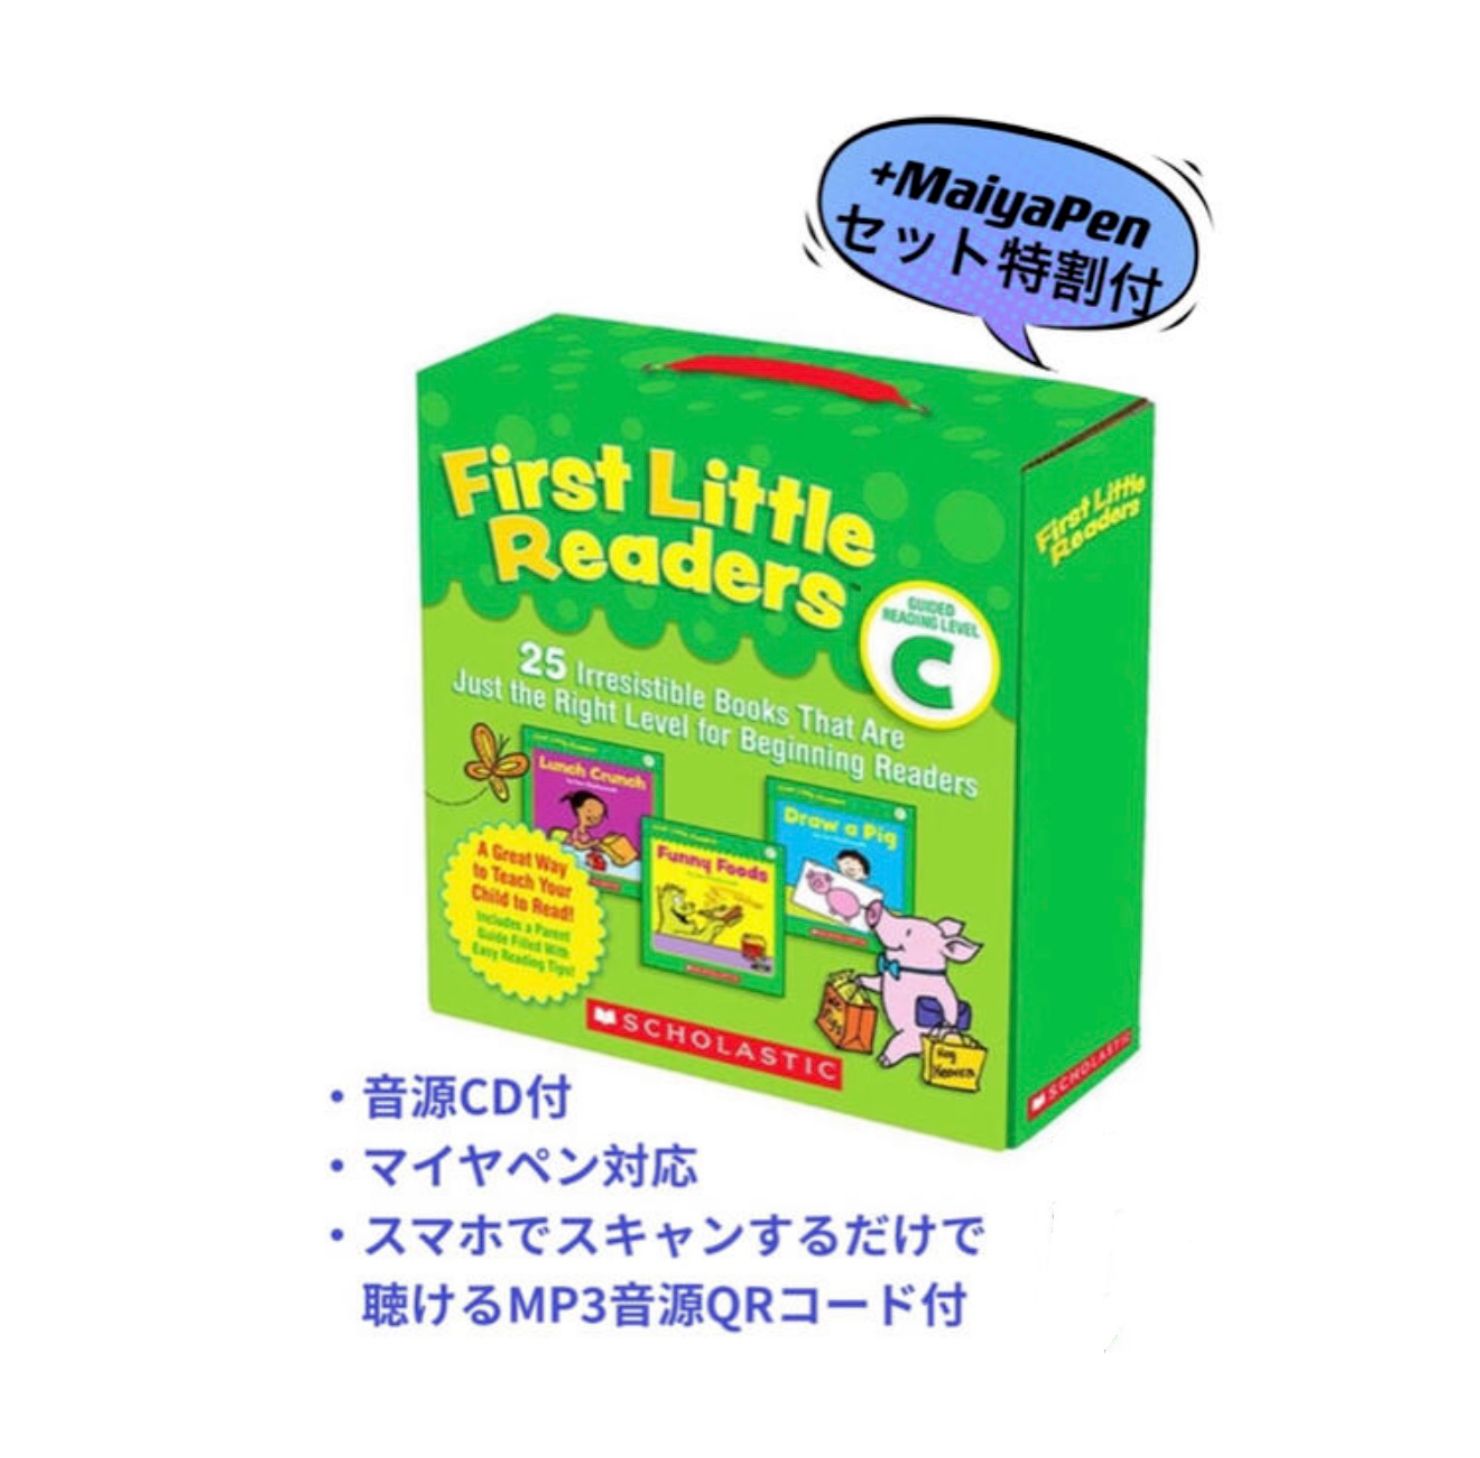 First Little Readers Aセット サイトワーズリーダーズ